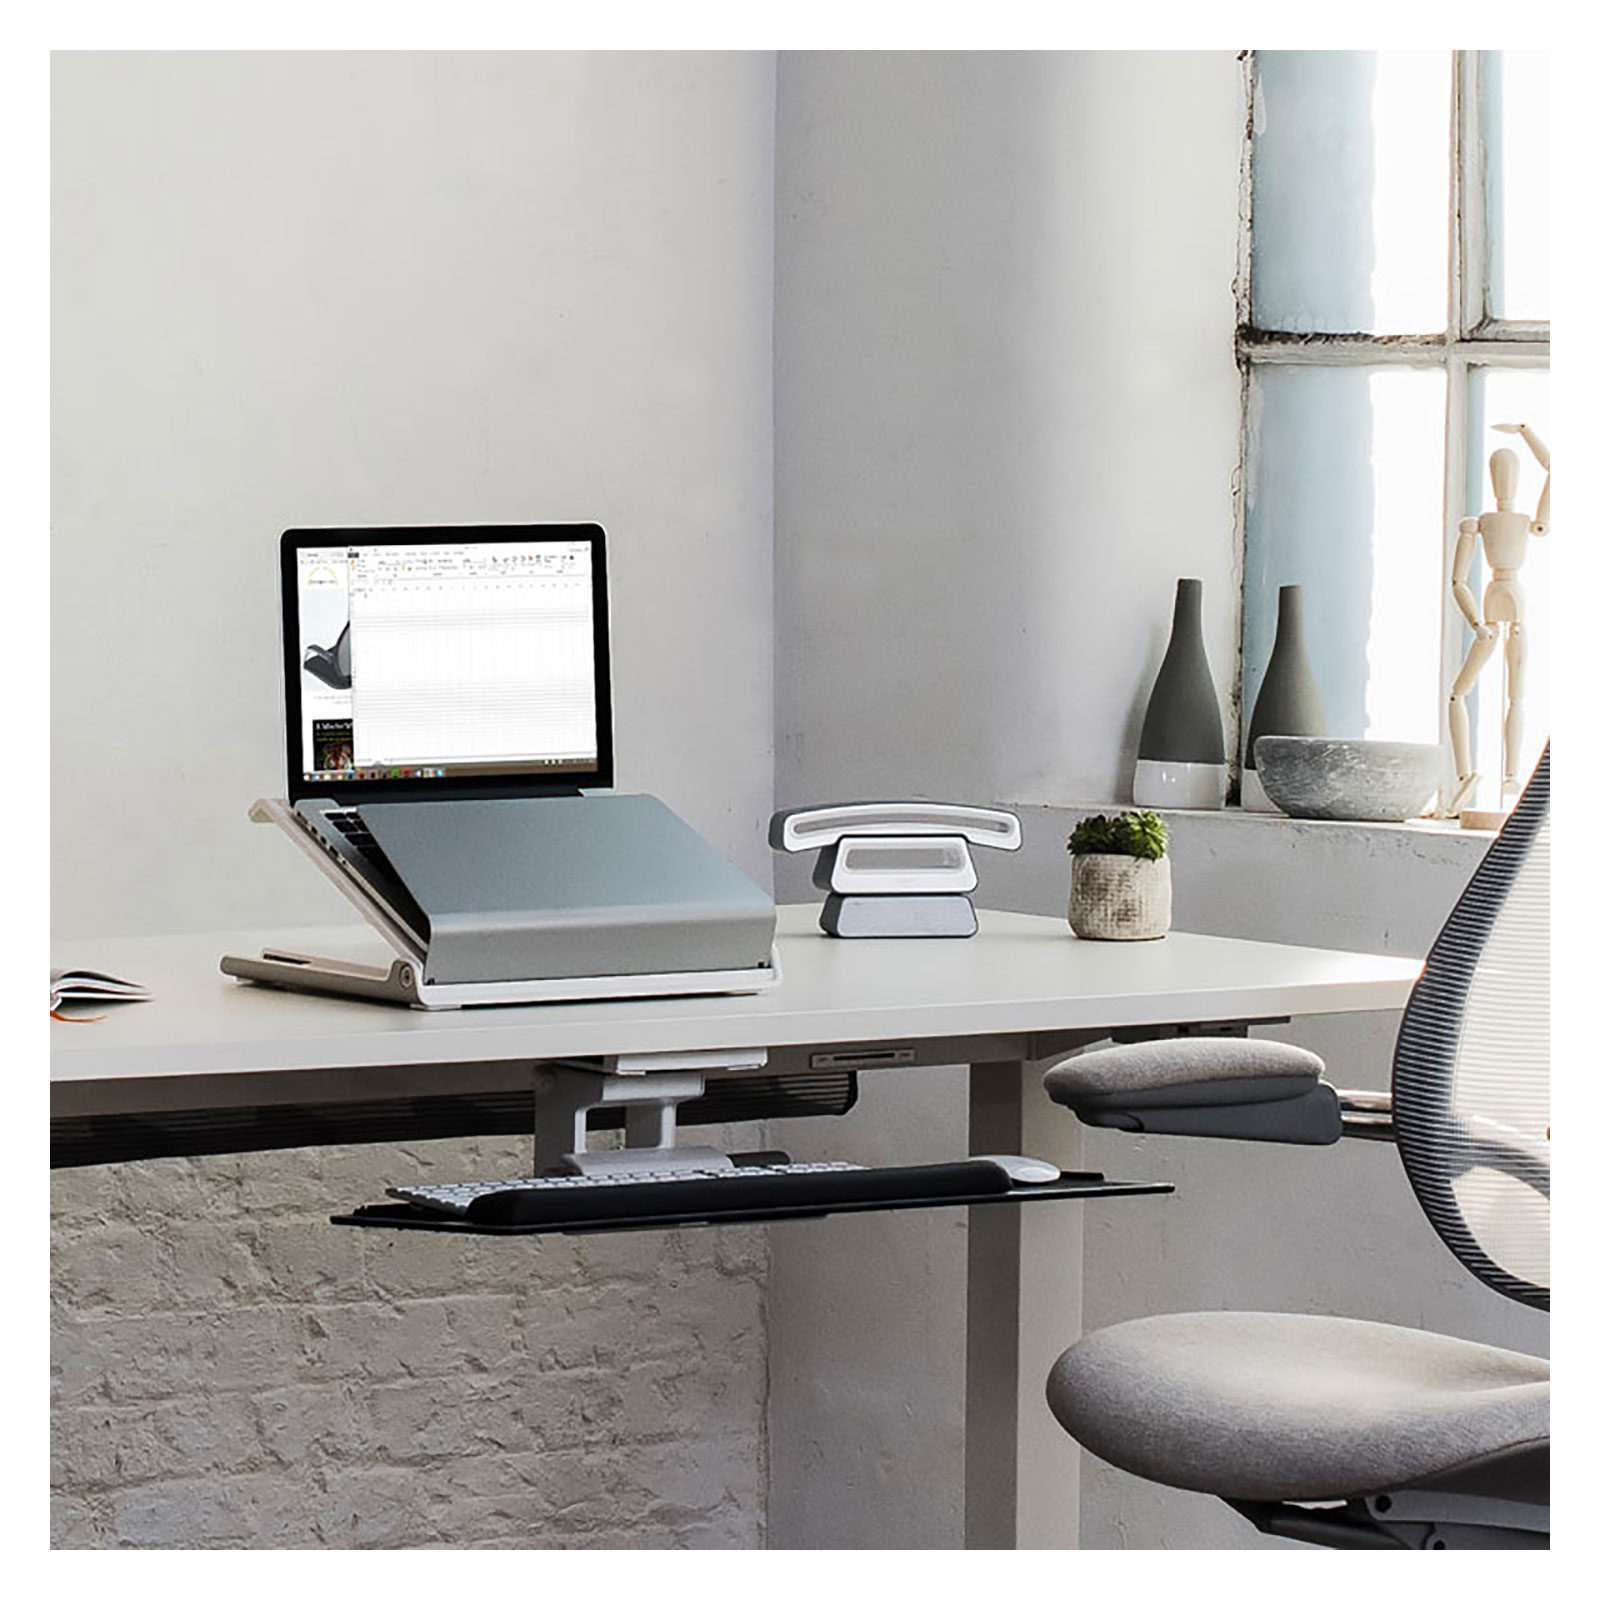 Humanscale Laptop Holder For Home Office  Trader Boys 